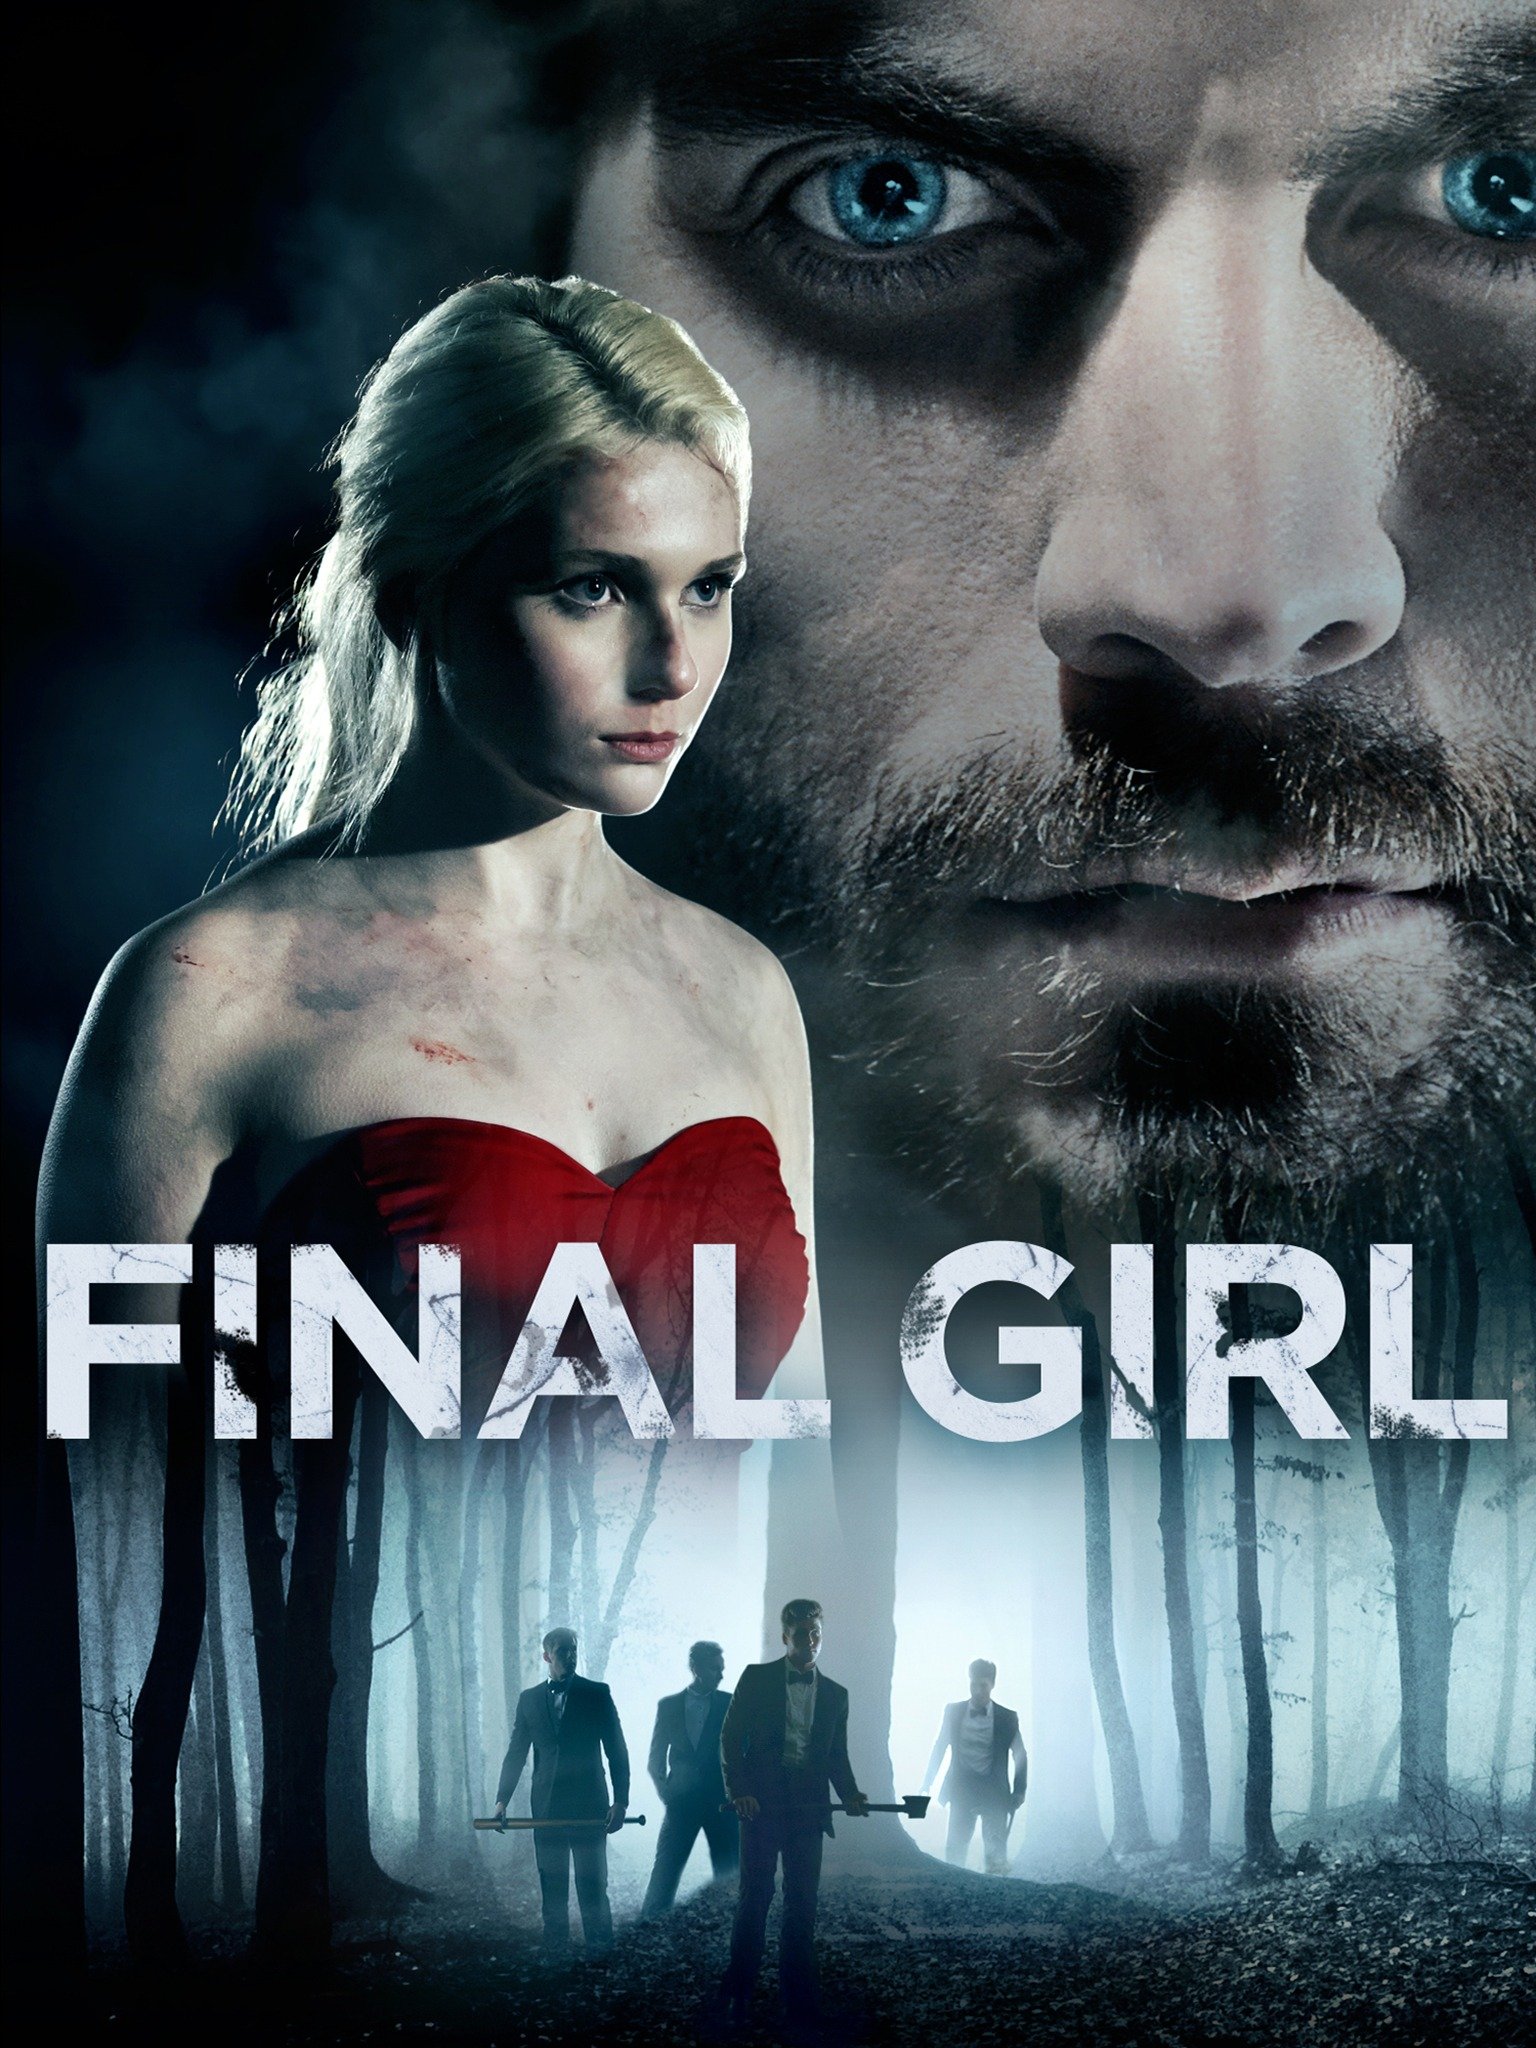 Final Girl International Trailer1 Trailers And Videos Rotten Tomatoes